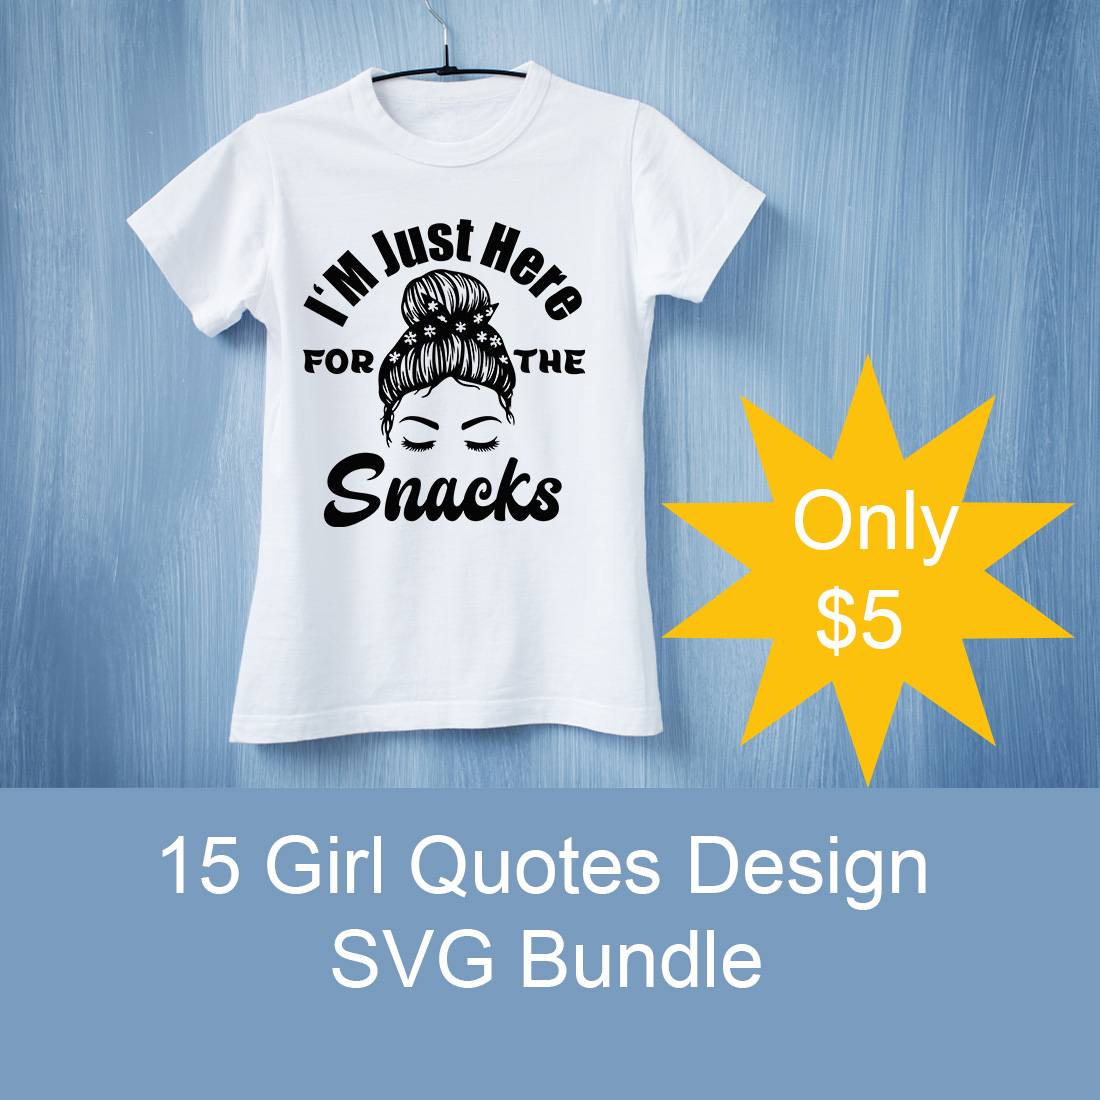 15 Girl Quotes Design SVG Bundle main cover.